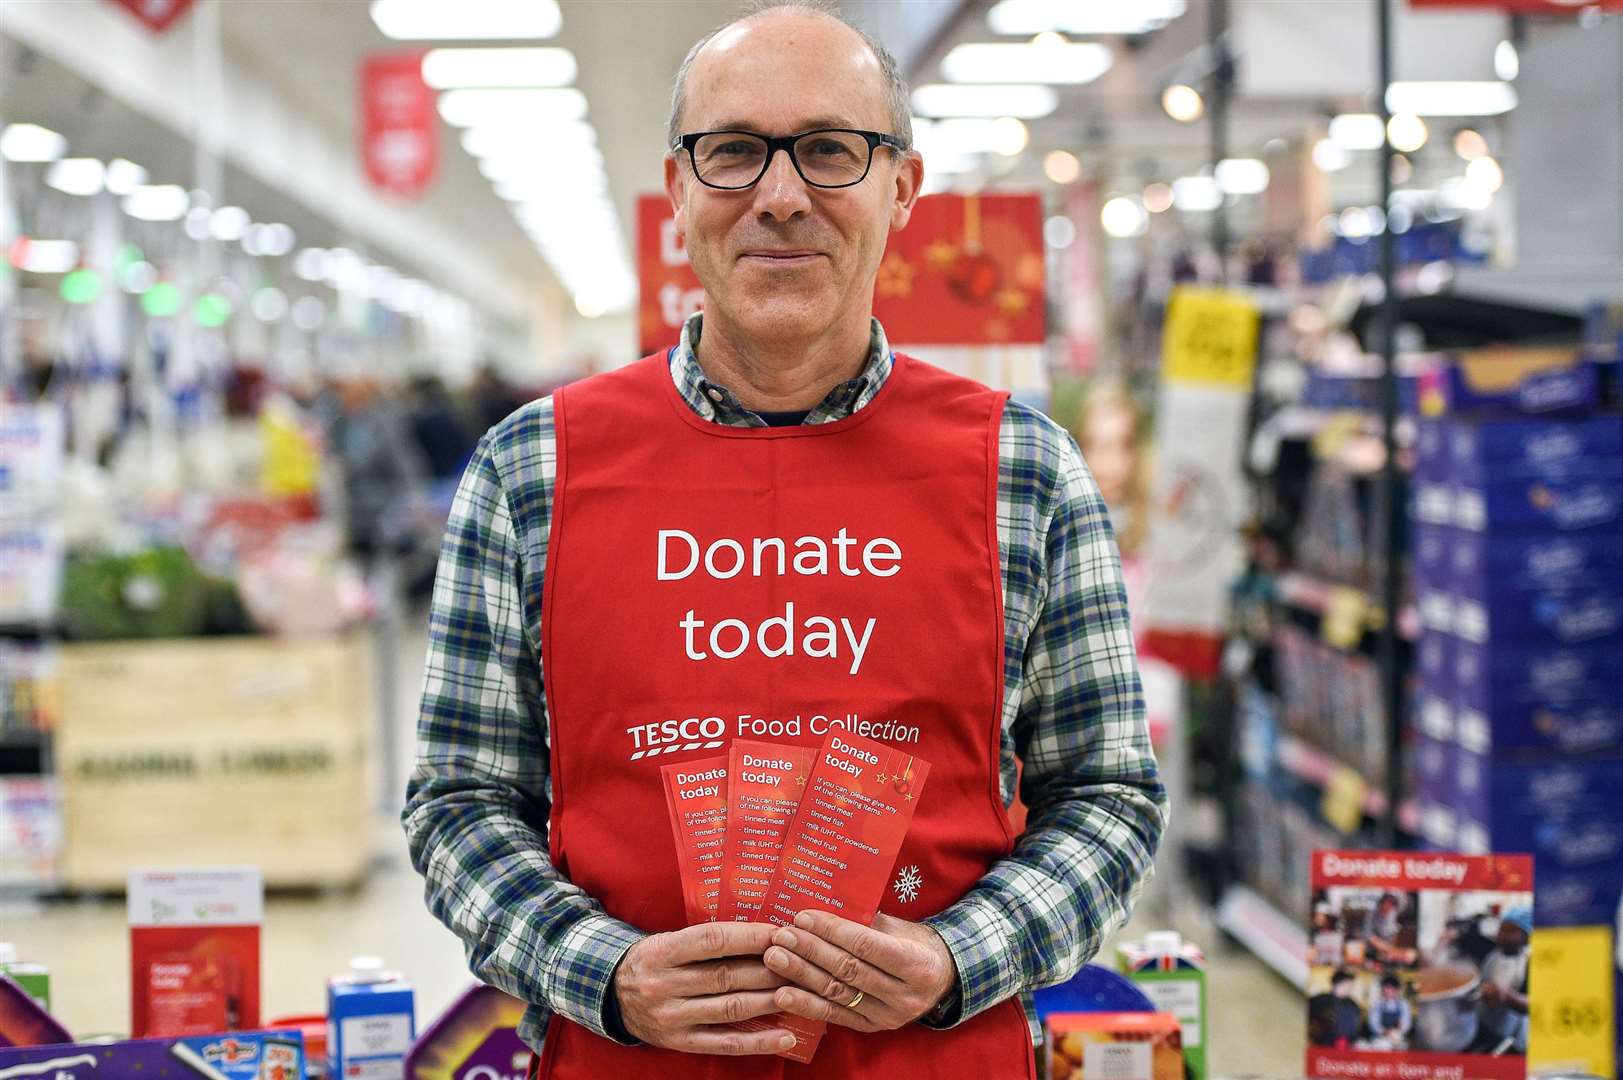 A Tesco volunteer holding a shopping list guide for donations at the launch of the Tesco Food Collection in the Surrey Quays Extra store in London.